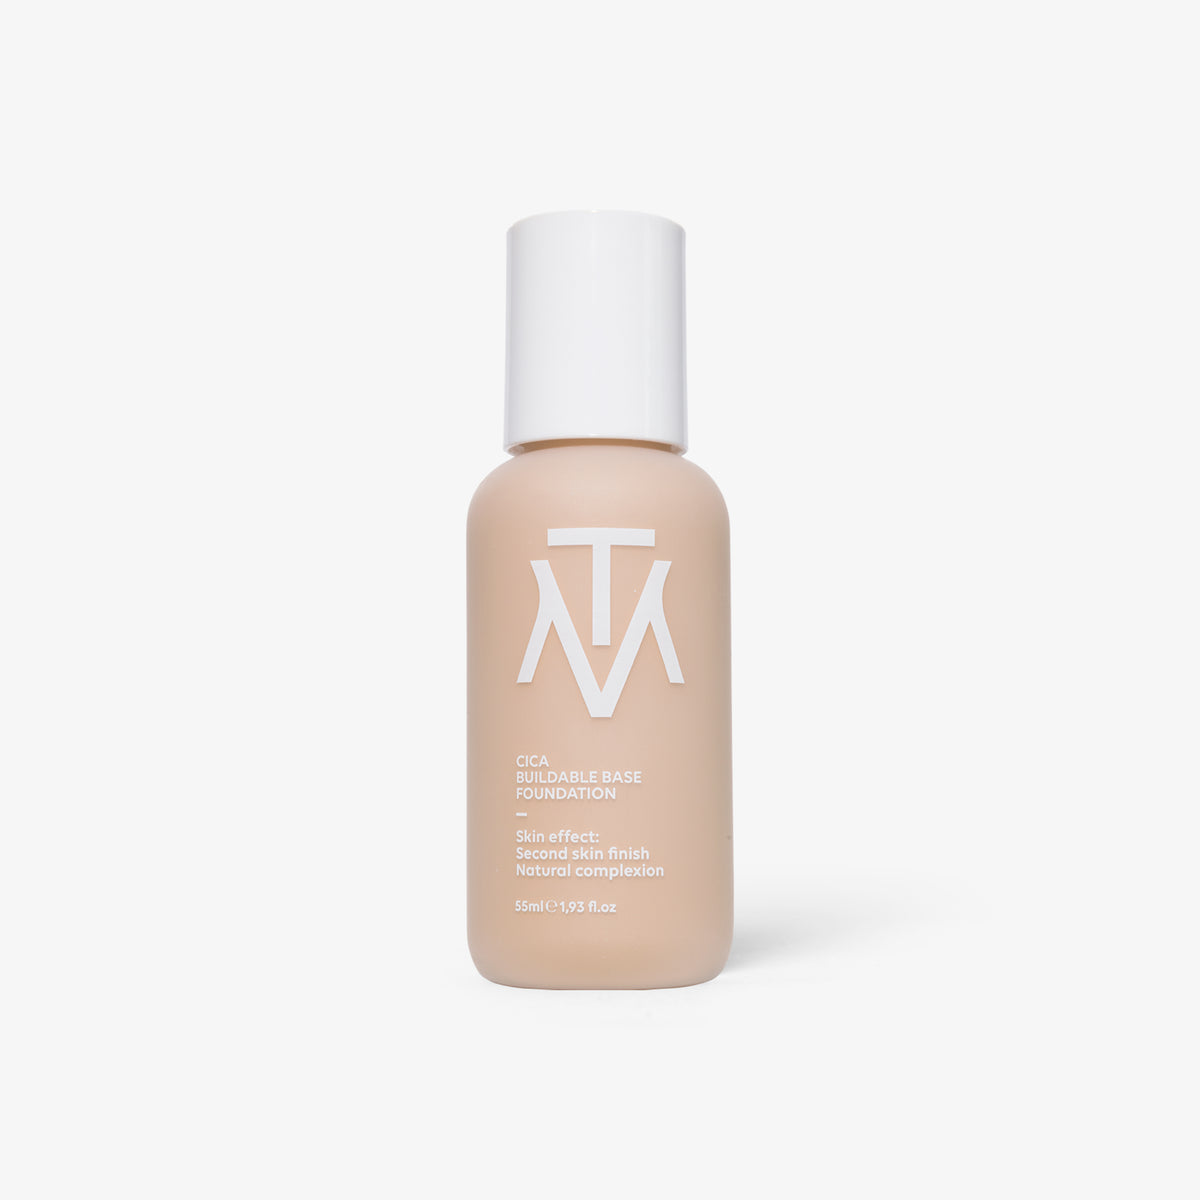 Cica Buildable Base Foundation